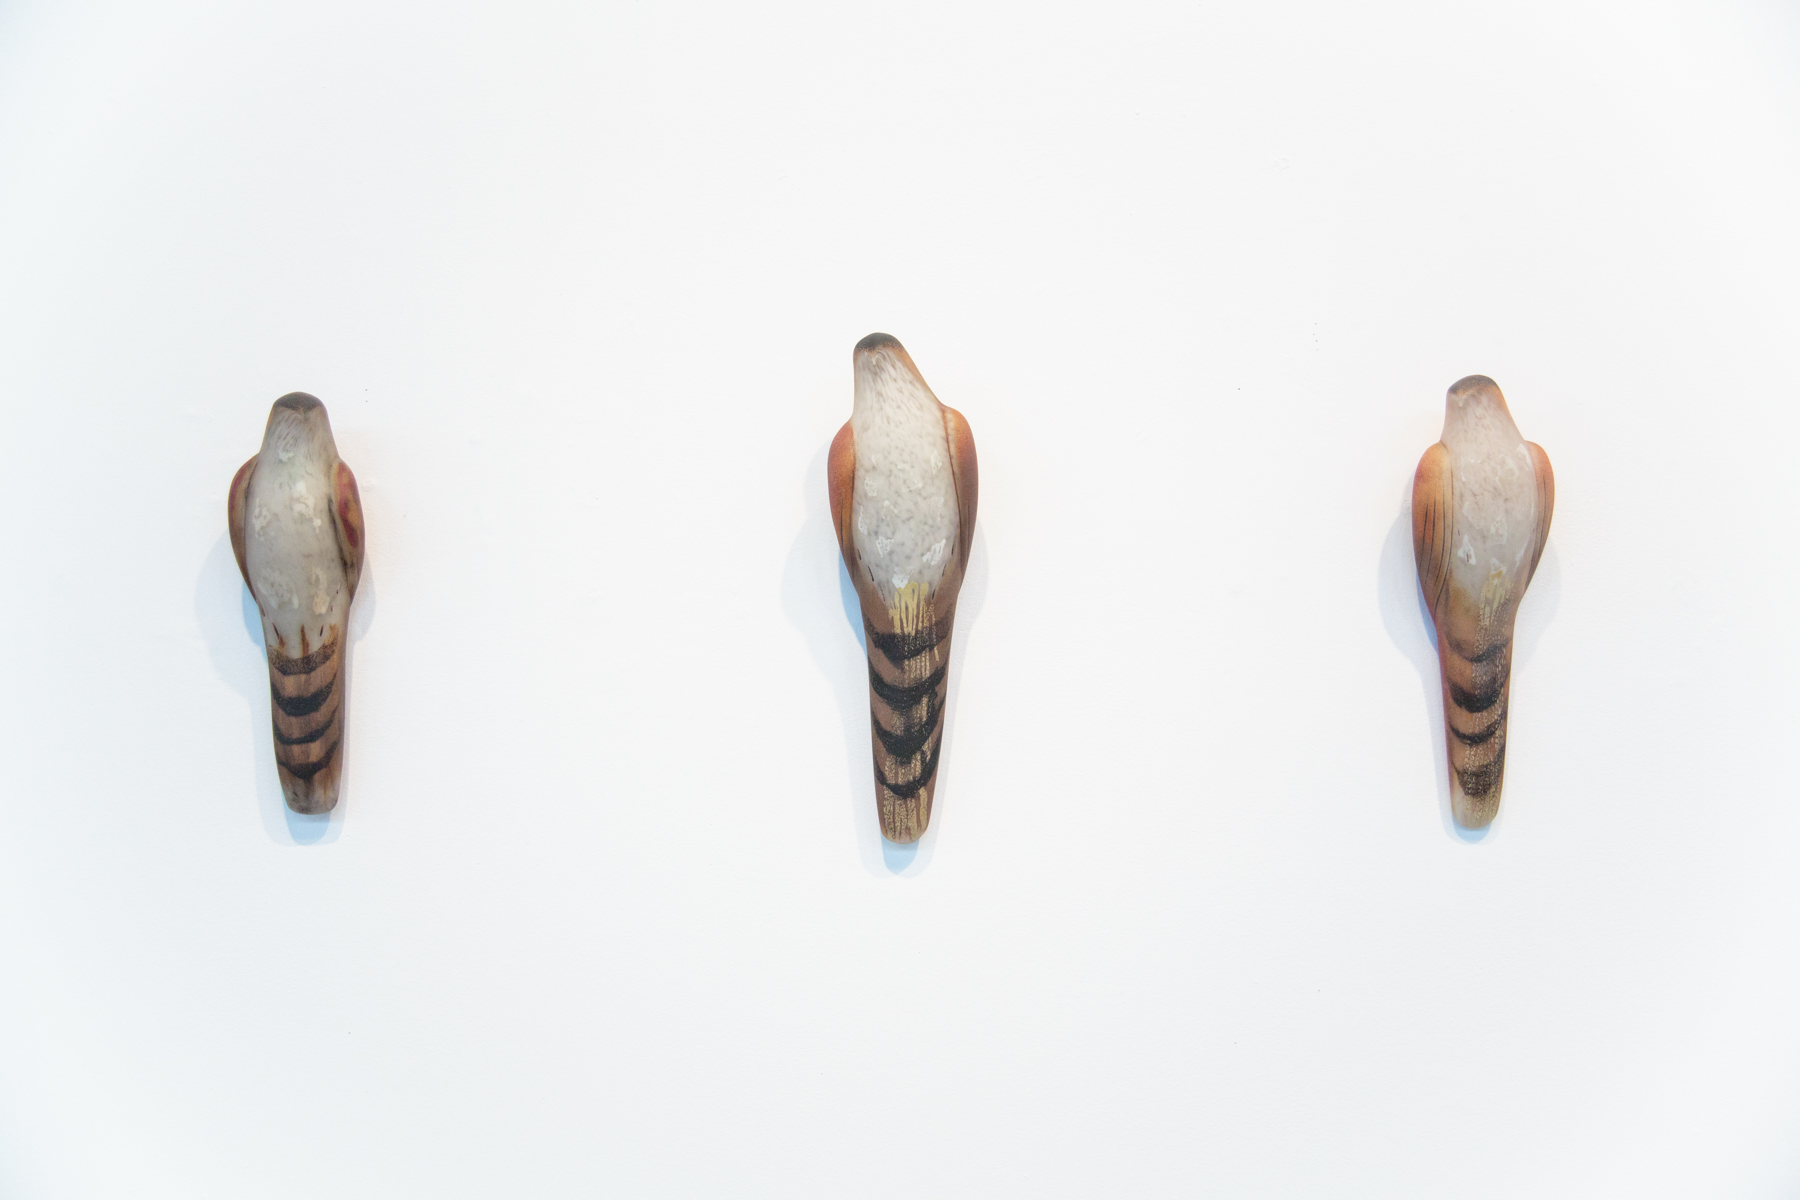  “Tobacco Lace Birds (Small, Large, Square)”, 2018 Hand blown pigmented glass Small: 14.5 x 4.5 x 4, Large: 16.5 x 5 x 4, Square: 13 x 4 x 3.5 inches 